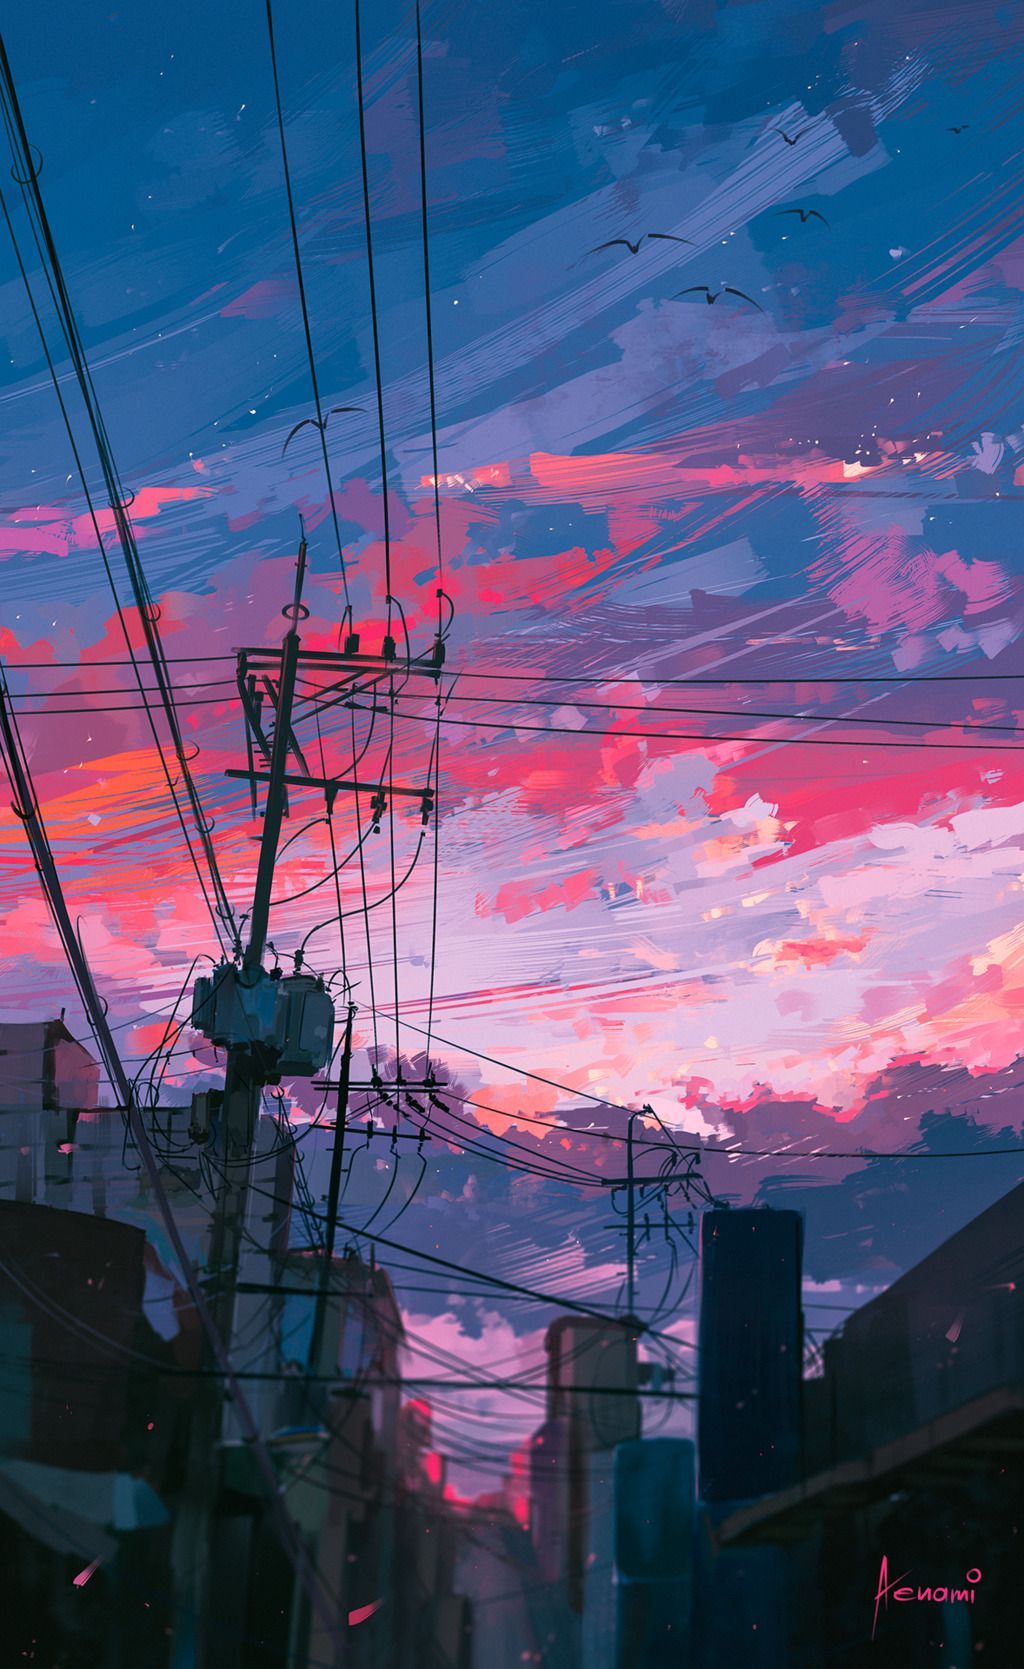 300+] Anime Iphone Wallpapers | Wallpapers.com